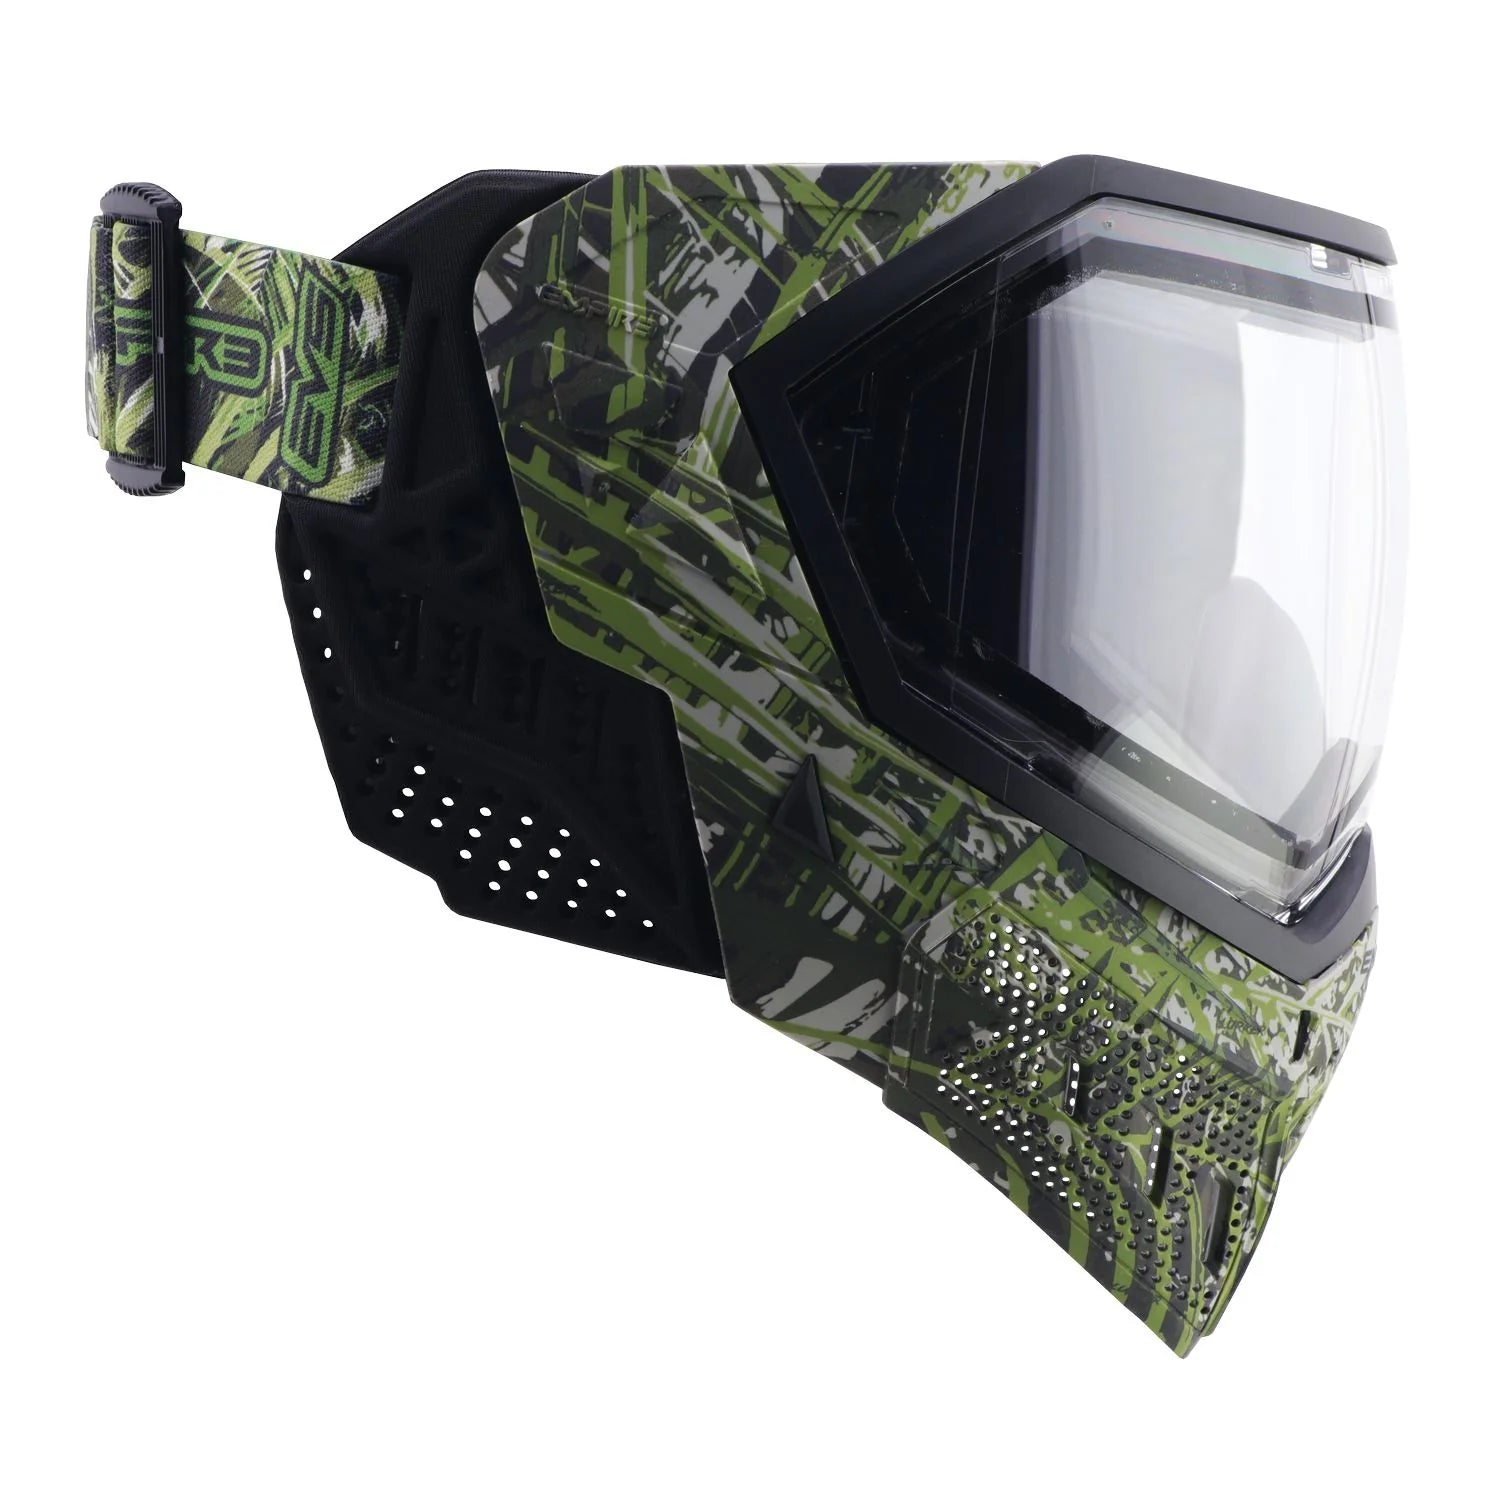 Empire EVS Lurker LE with Thermal Ninja & Thermal Clear Lenses | Shop Airsoft Goggle